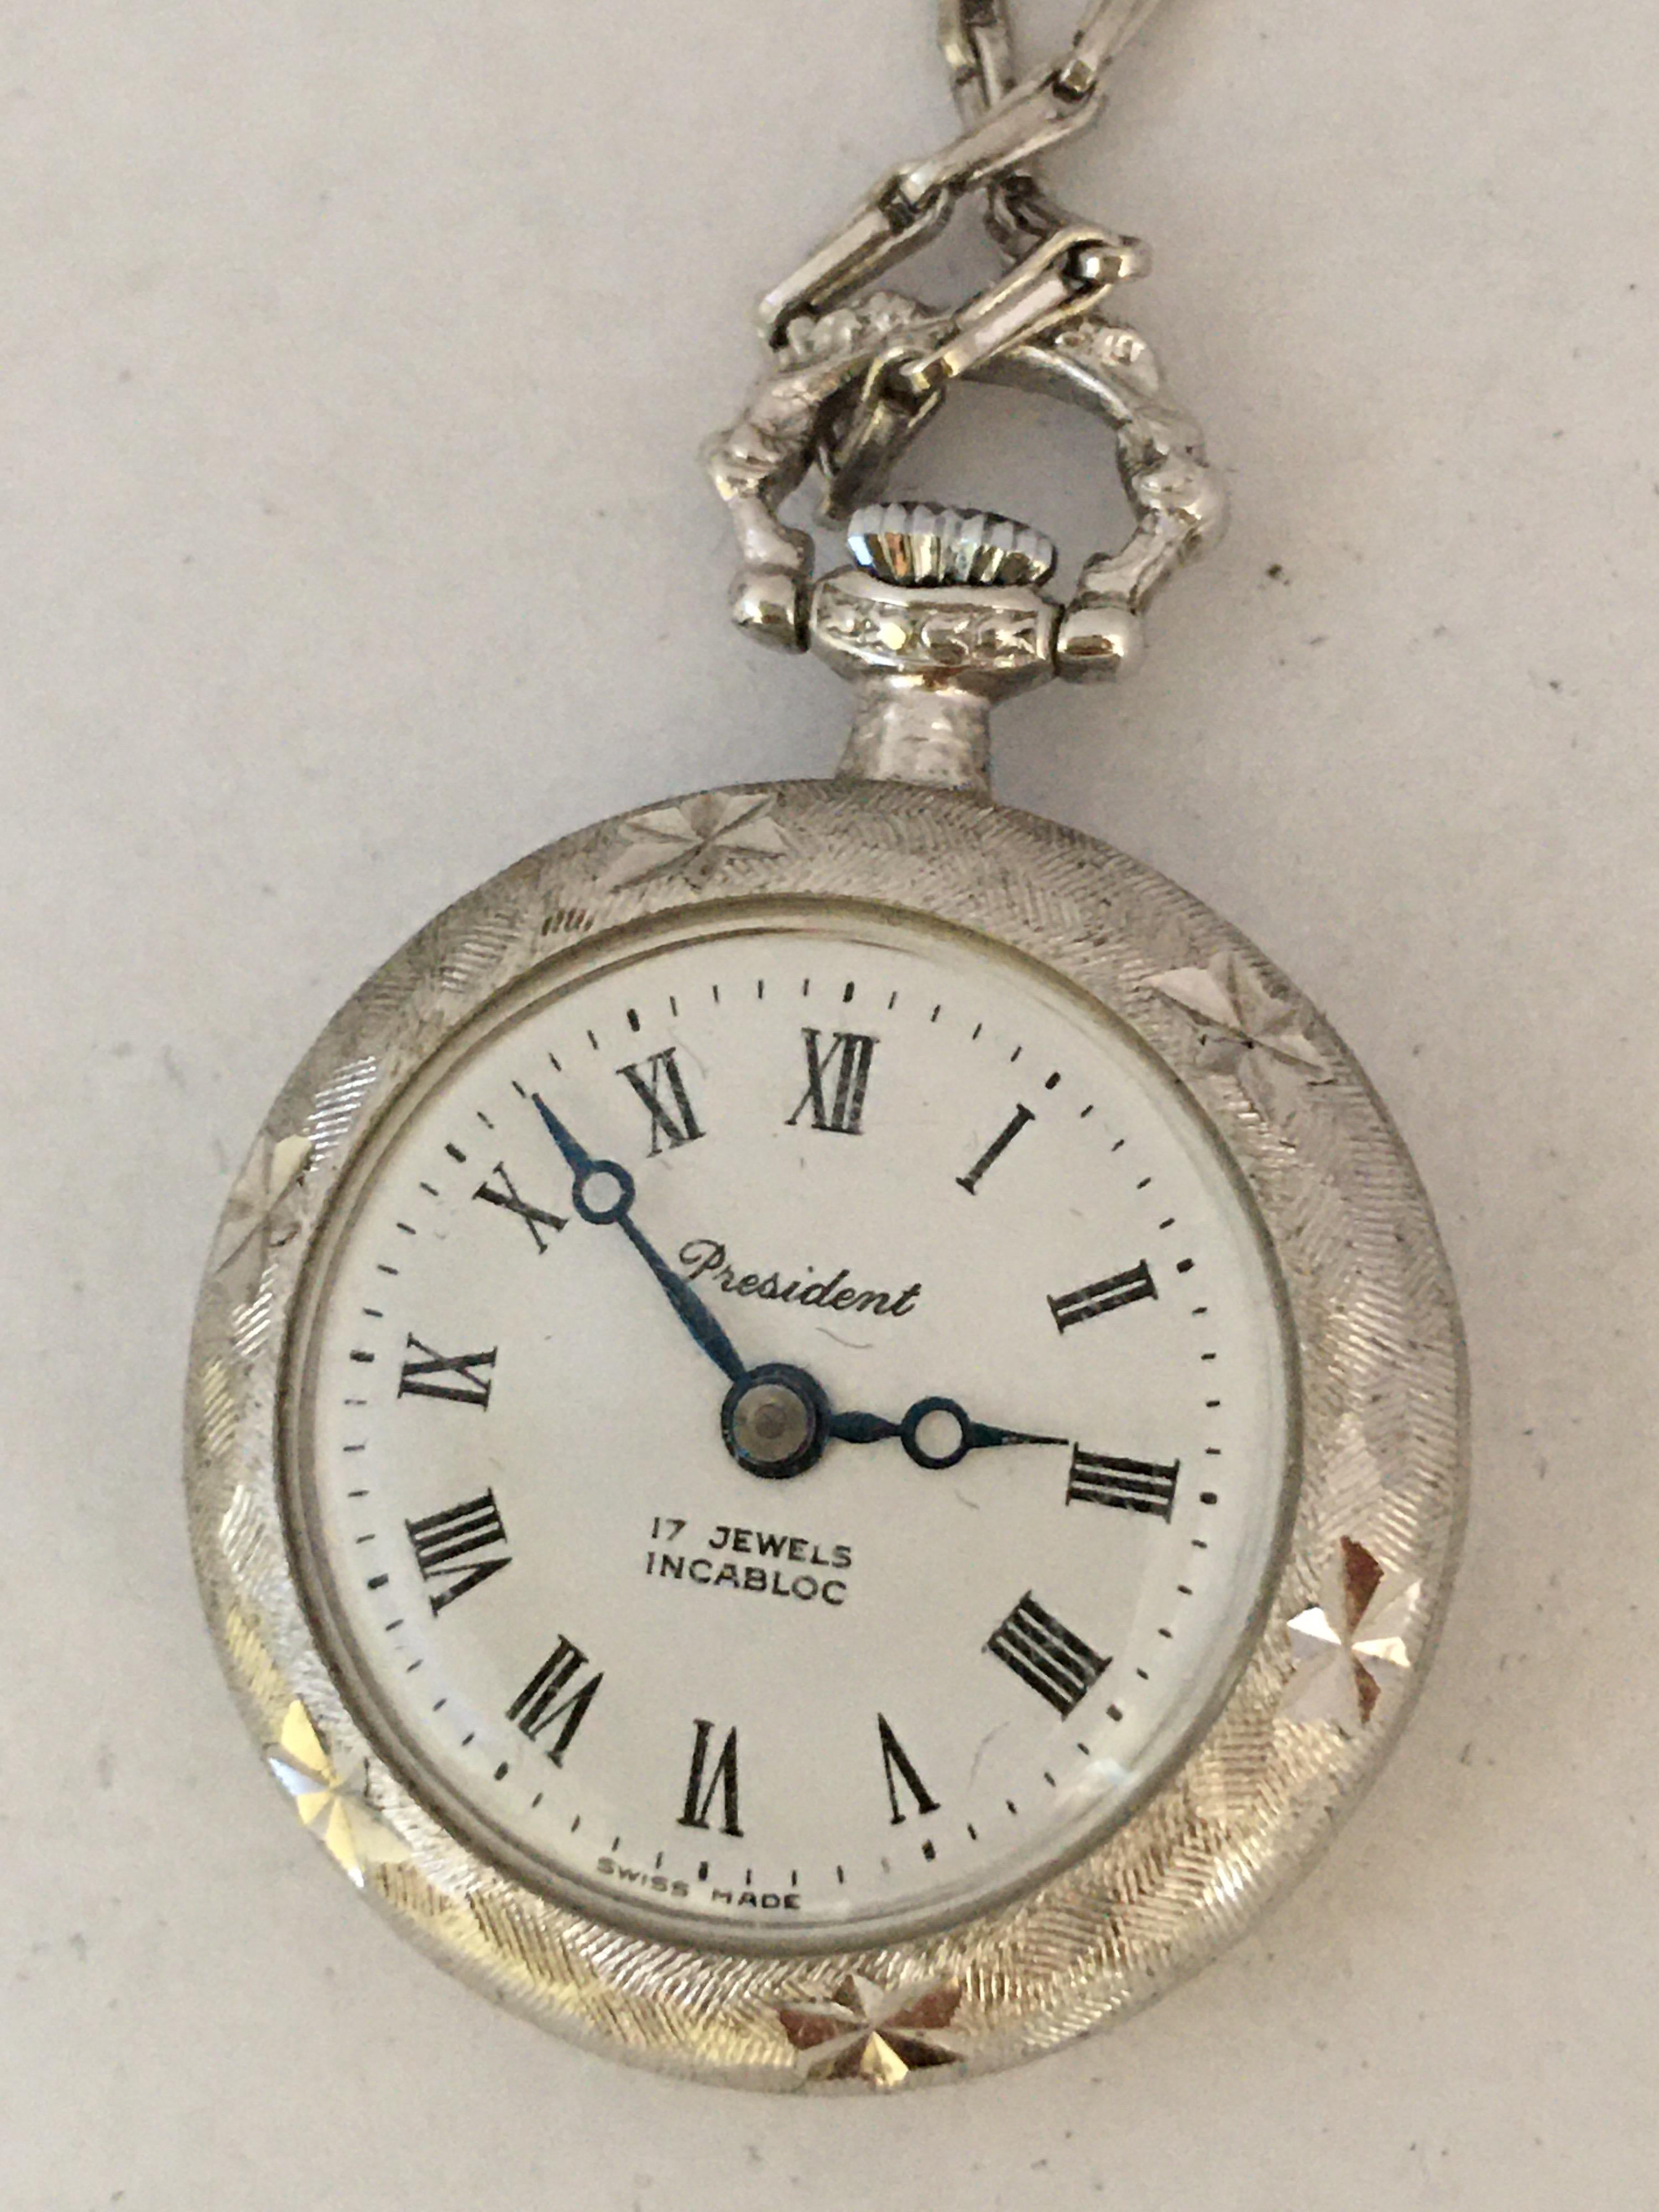 Vintage 1960s Hand-Winding Silver Plated Engraved Pendant Watch 7